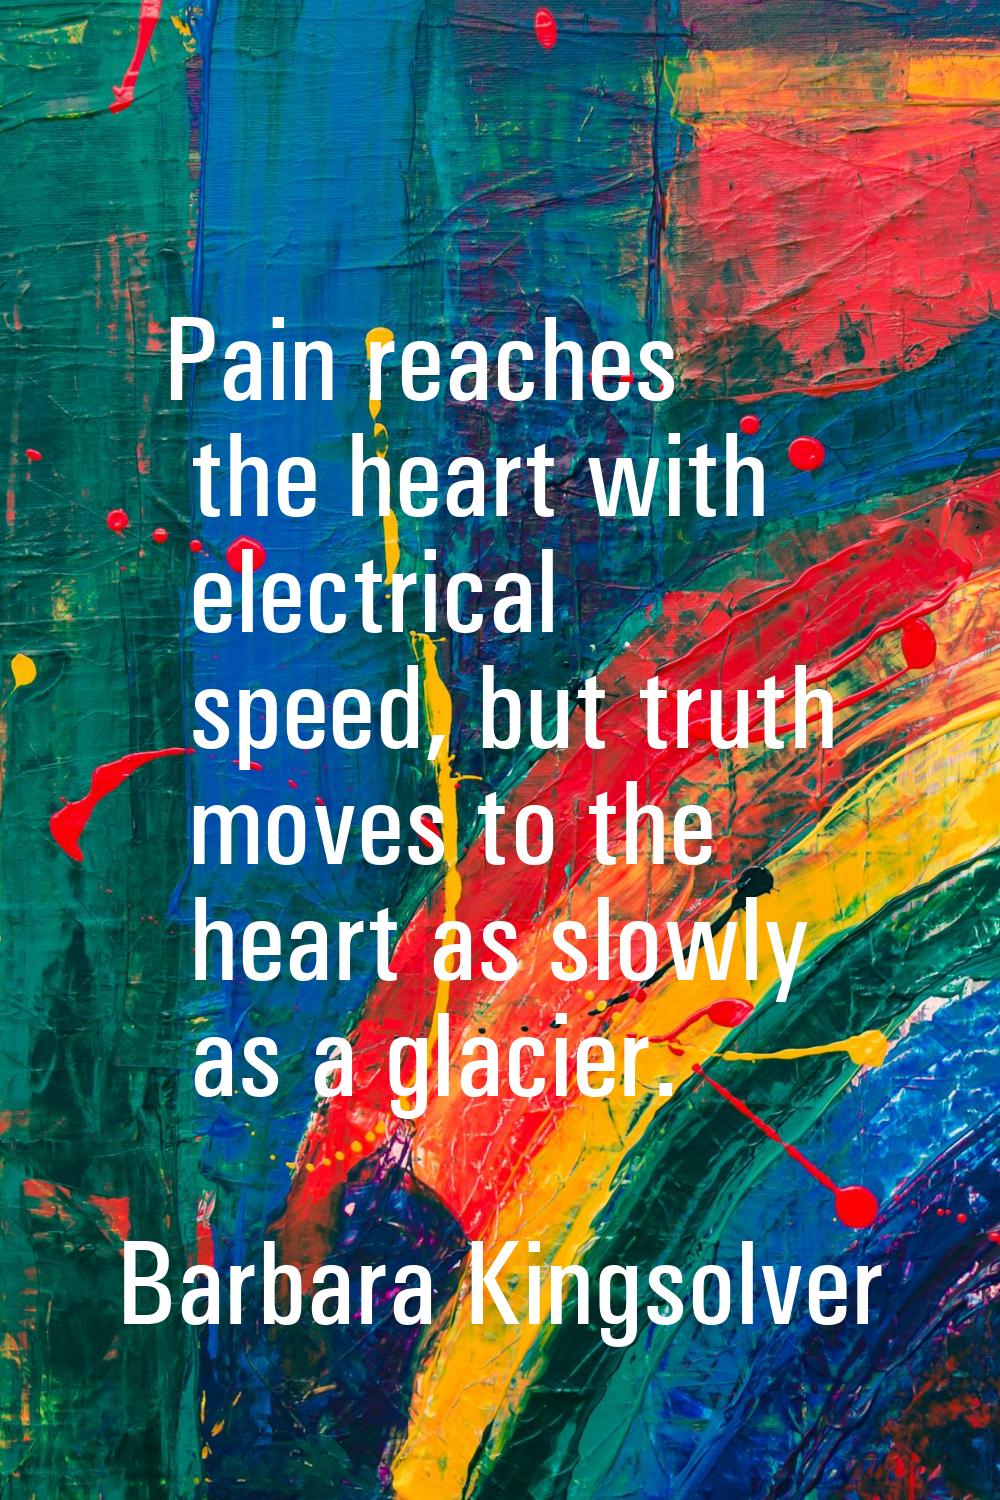 Pain reaches the heart with electrical speed, but truth moves to the heart as slowly as a glacier.